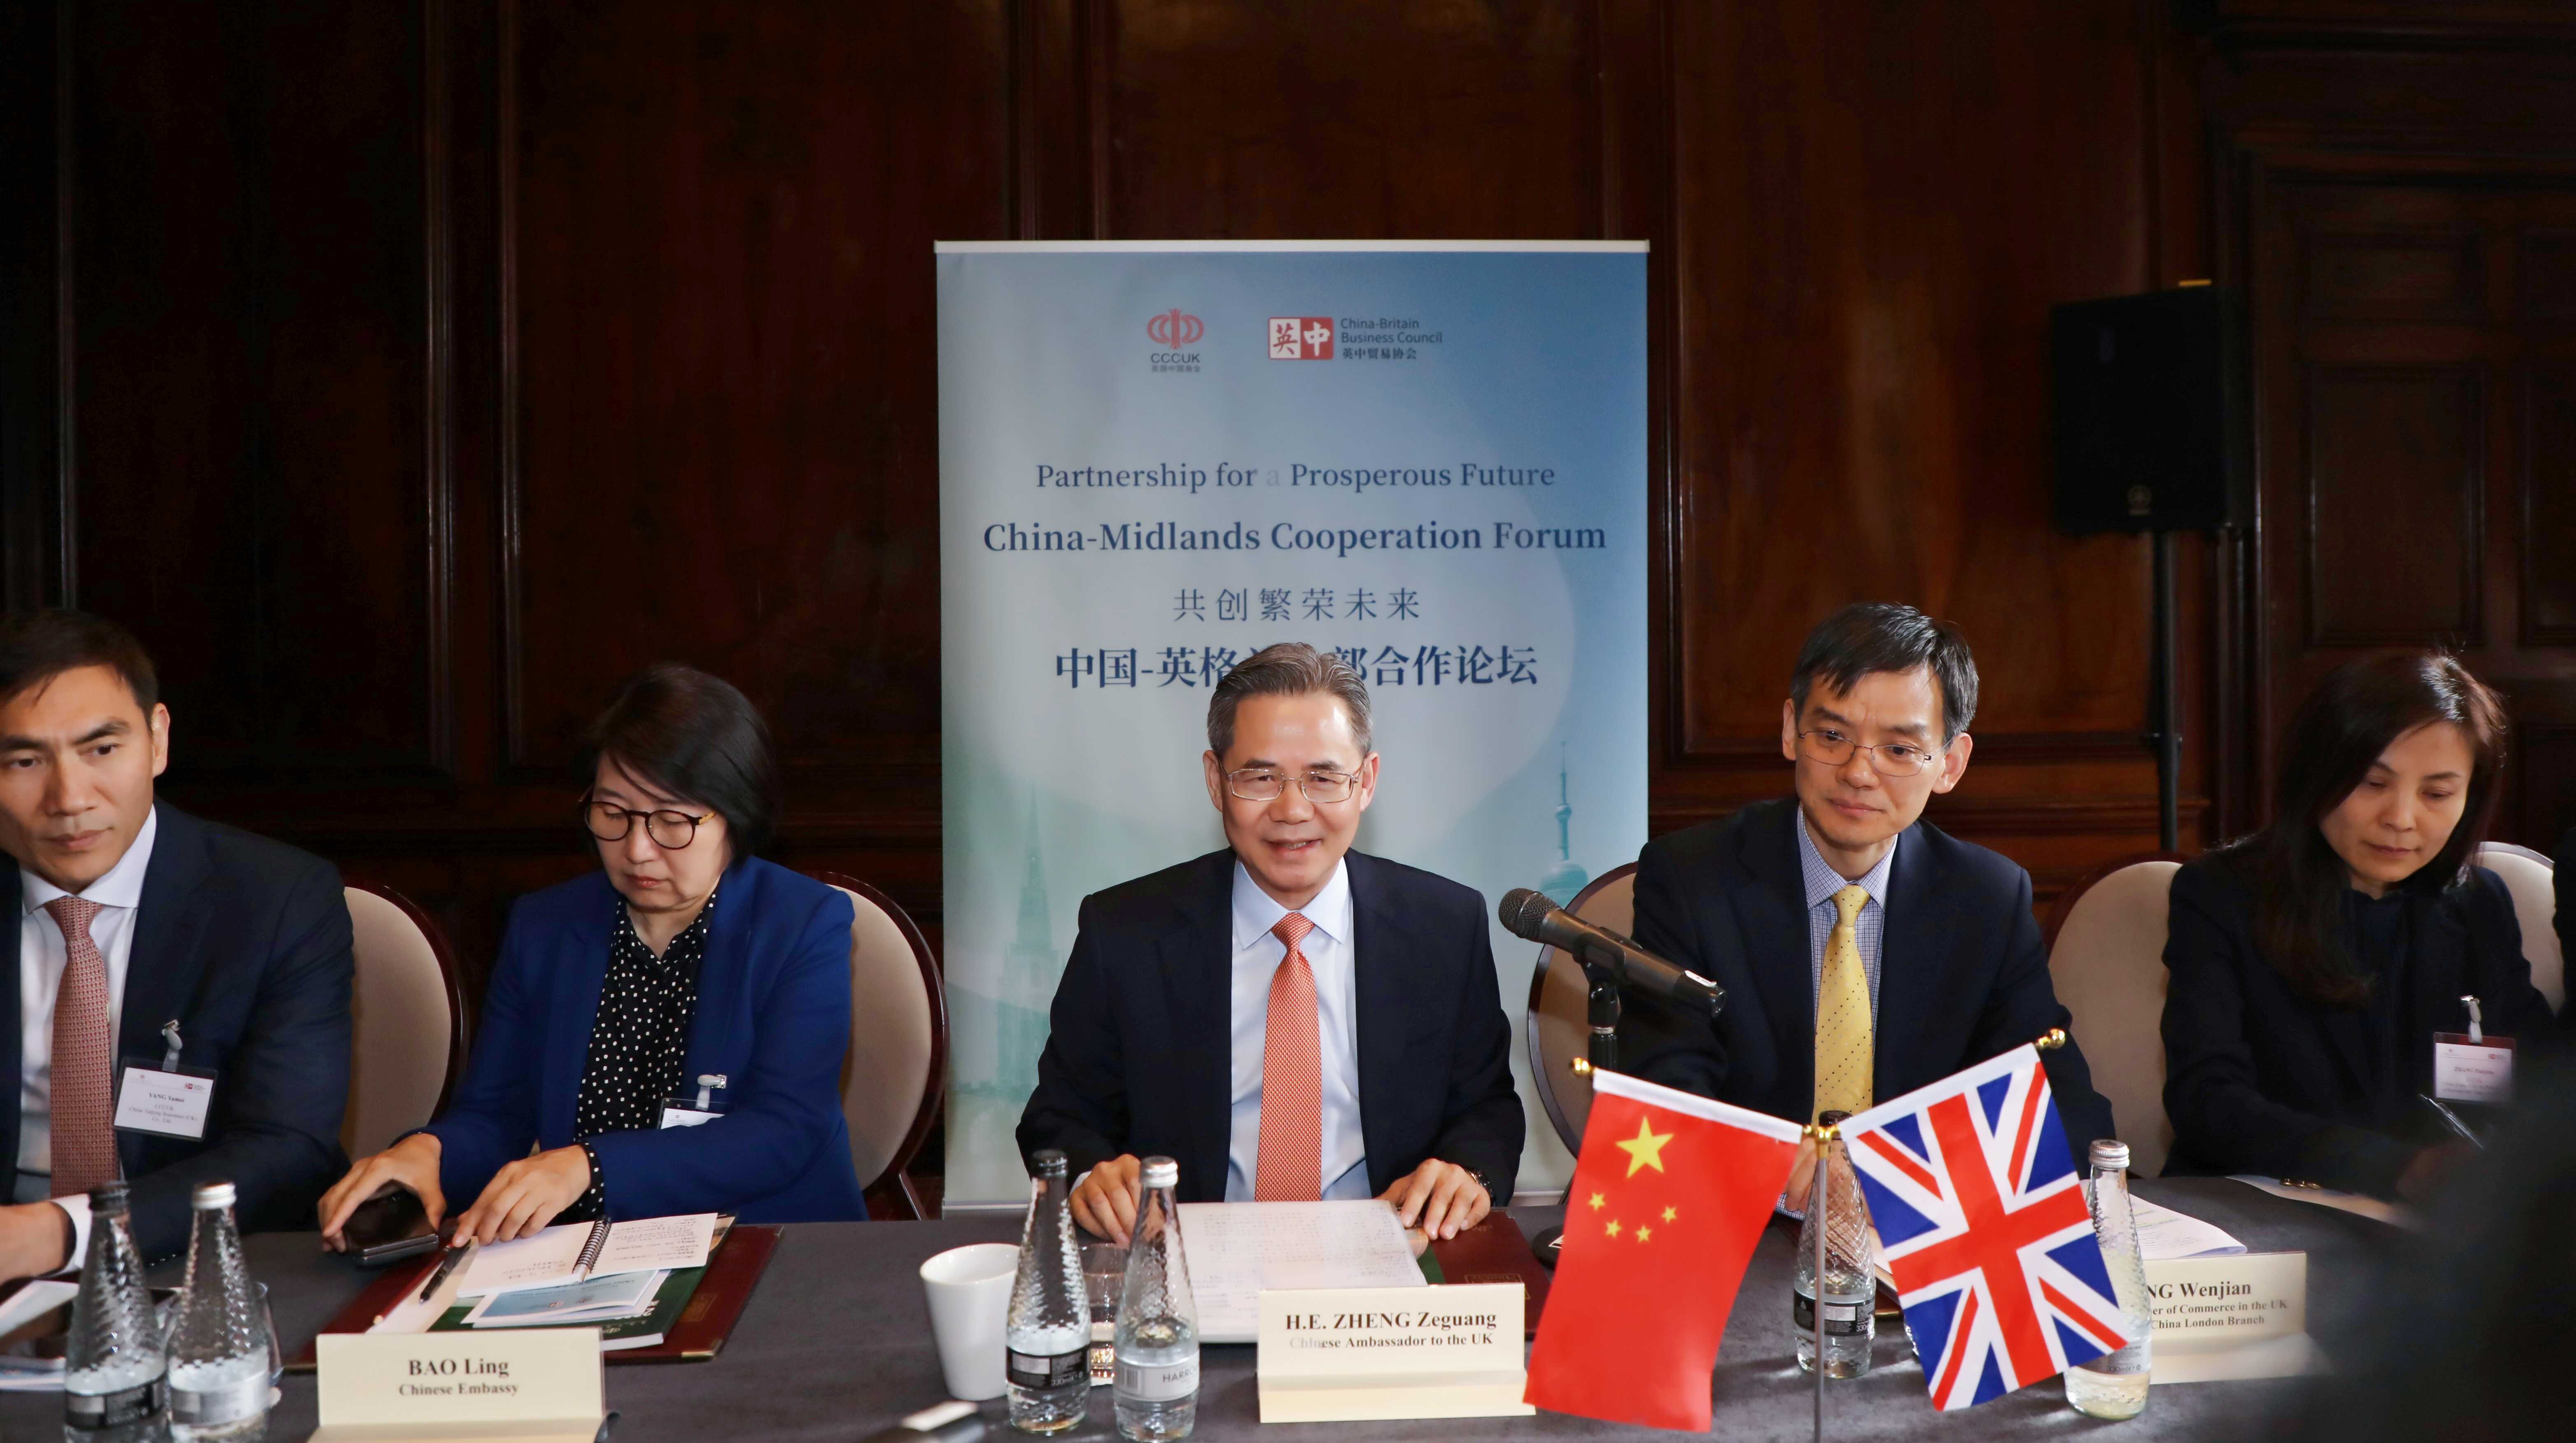 Chinese Ambassador to the UK Zheng Zeguang delivered a speech at the China-Midlands Cooperation Forum. /Chinese Embassy in the UK